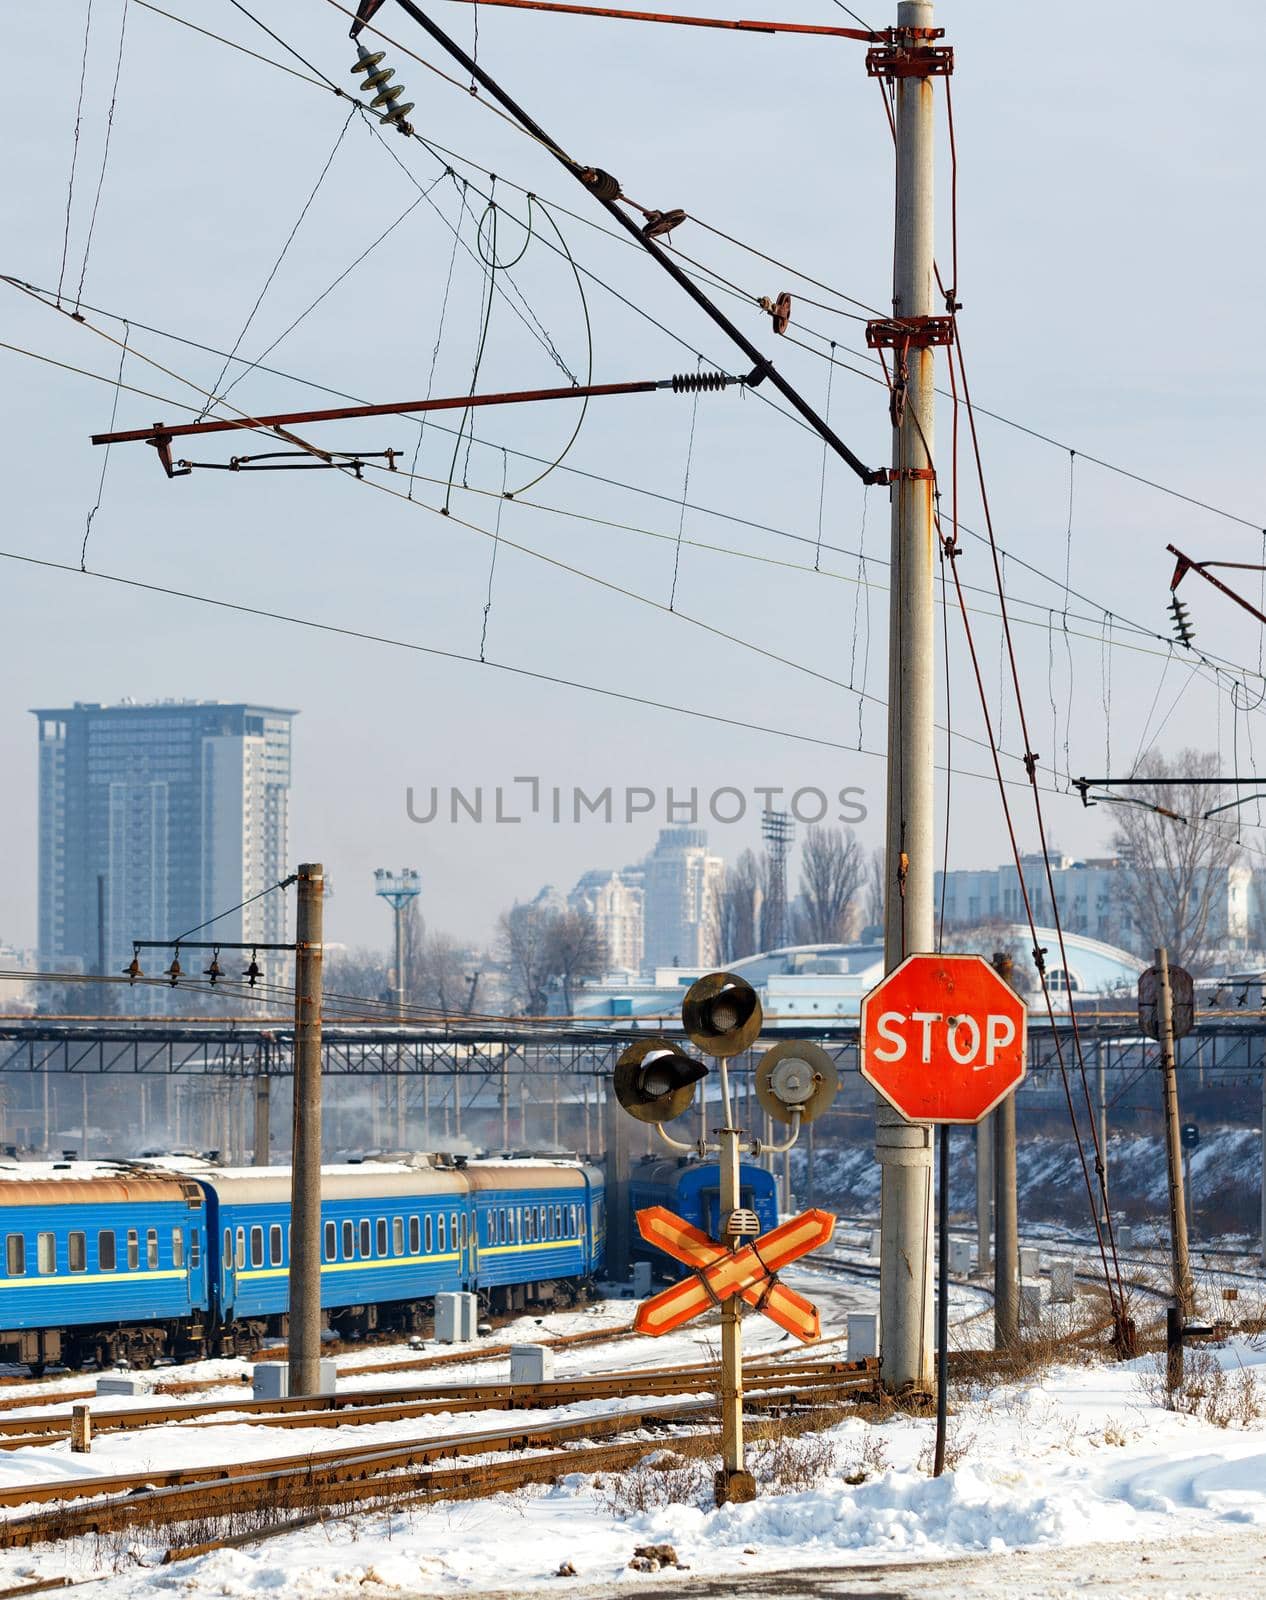 Red stop sign at the railway crossing at the entrance to the city against the background of the winter season. by Sergii